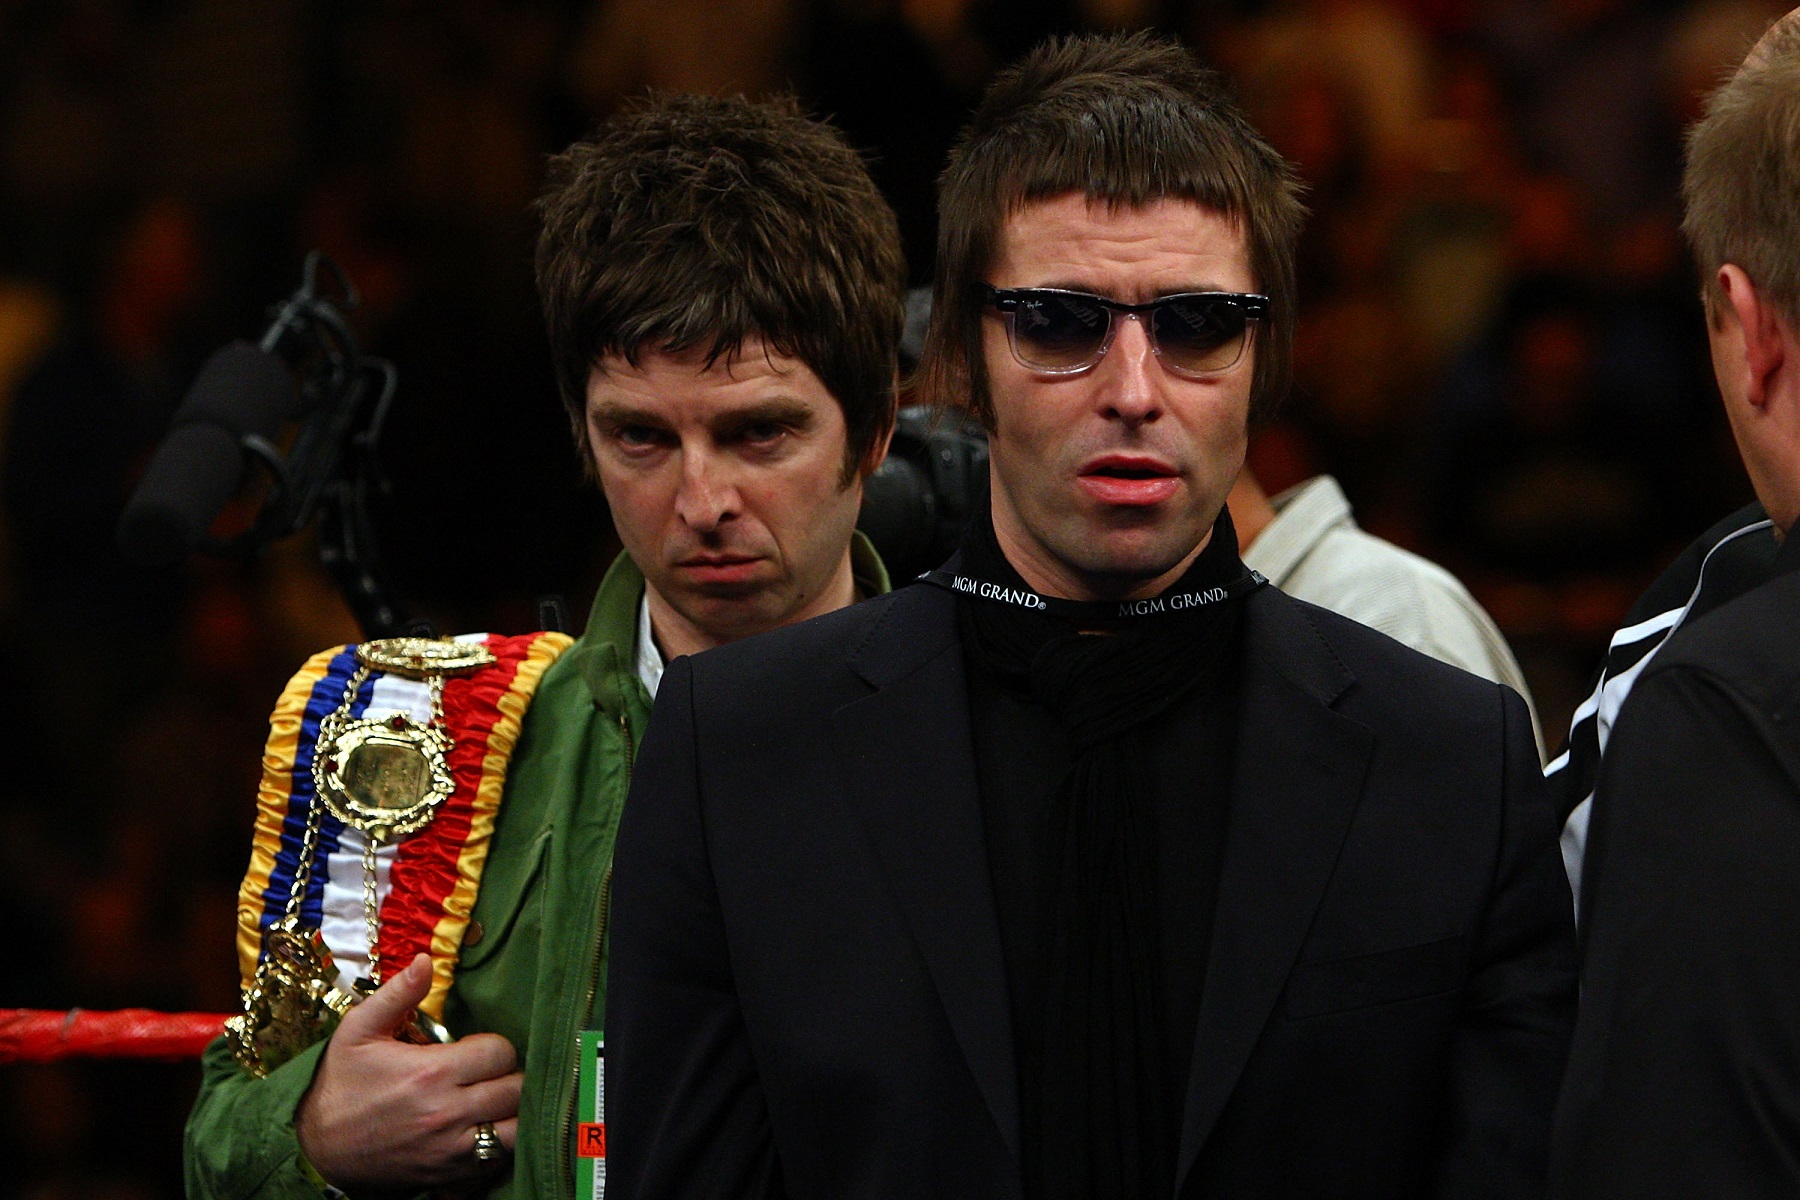 LAS VEGAS - NOVEMBER 22:  Noel and Liam Gallagher of Oasis bring out boxer Ricky Hatton of England's belts before taking on Paulie Malignaggi during their light-welterweight fight at the MGM Grand Garden Arena November 22, 2008 in Las Vegas, Nevada.  (Photo by John Gichigi/Getty Images)